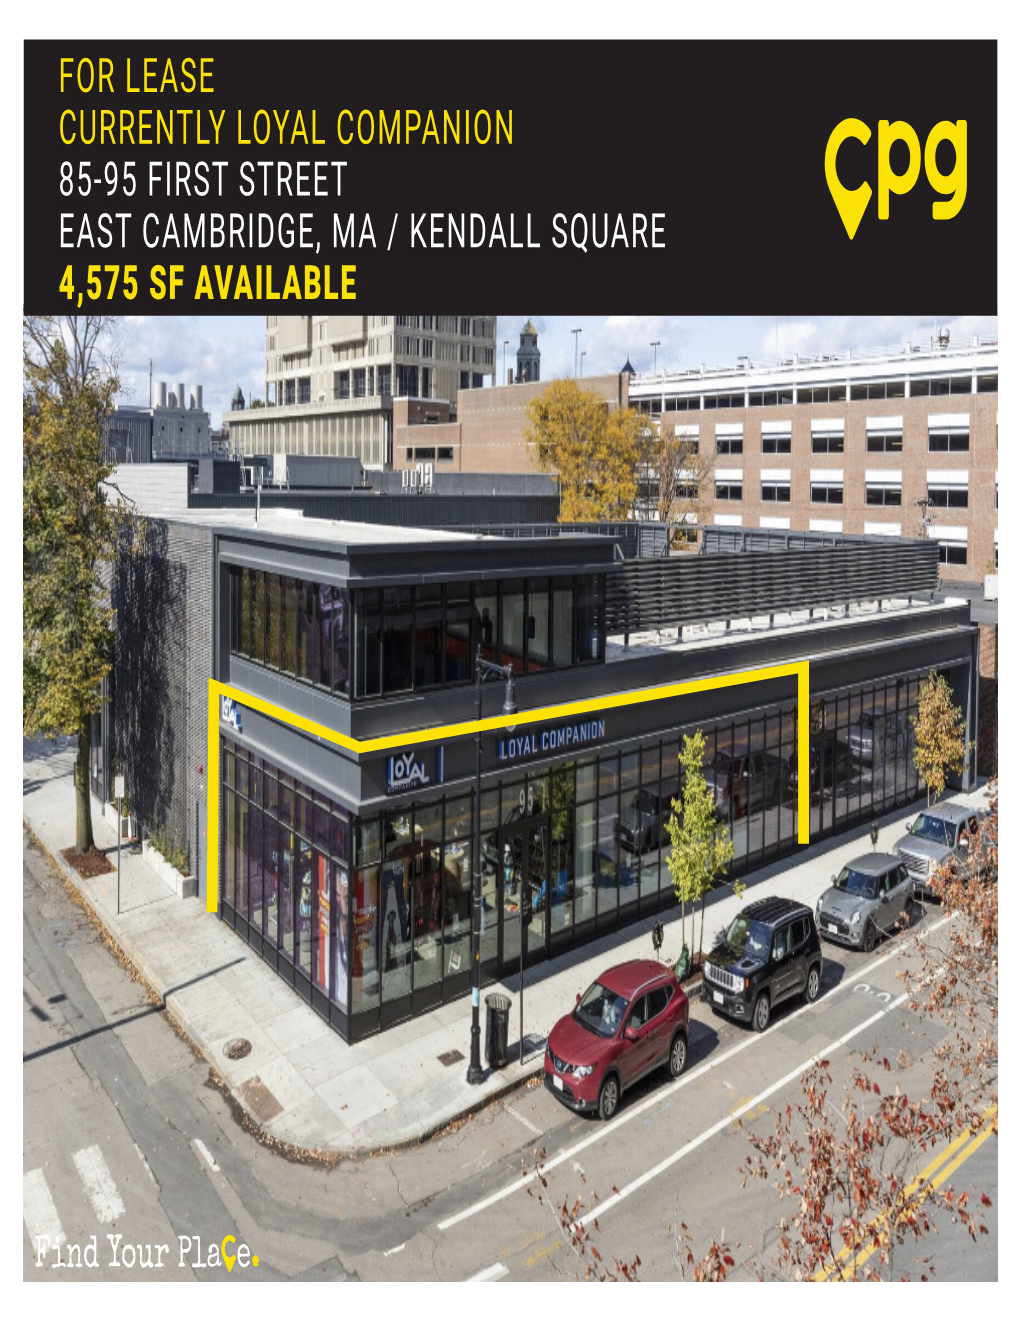 For Lease Currently Loyal Companion 85-95 First Street East Cambridge, Ma / Kendall Square 4,575 Sf Available Property Details